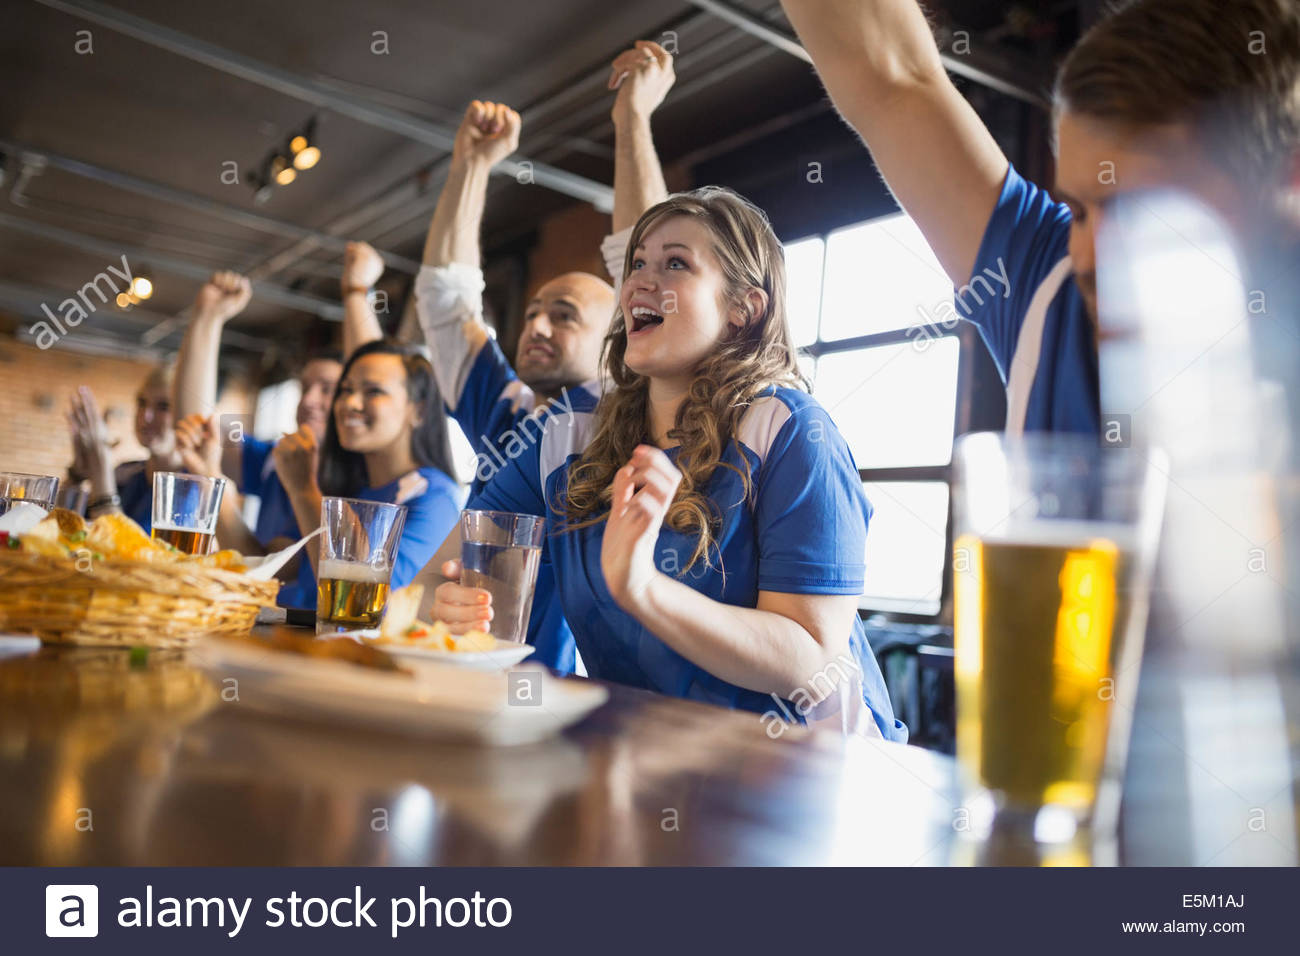 Sports fans cheering at bar in pub Stock Photo